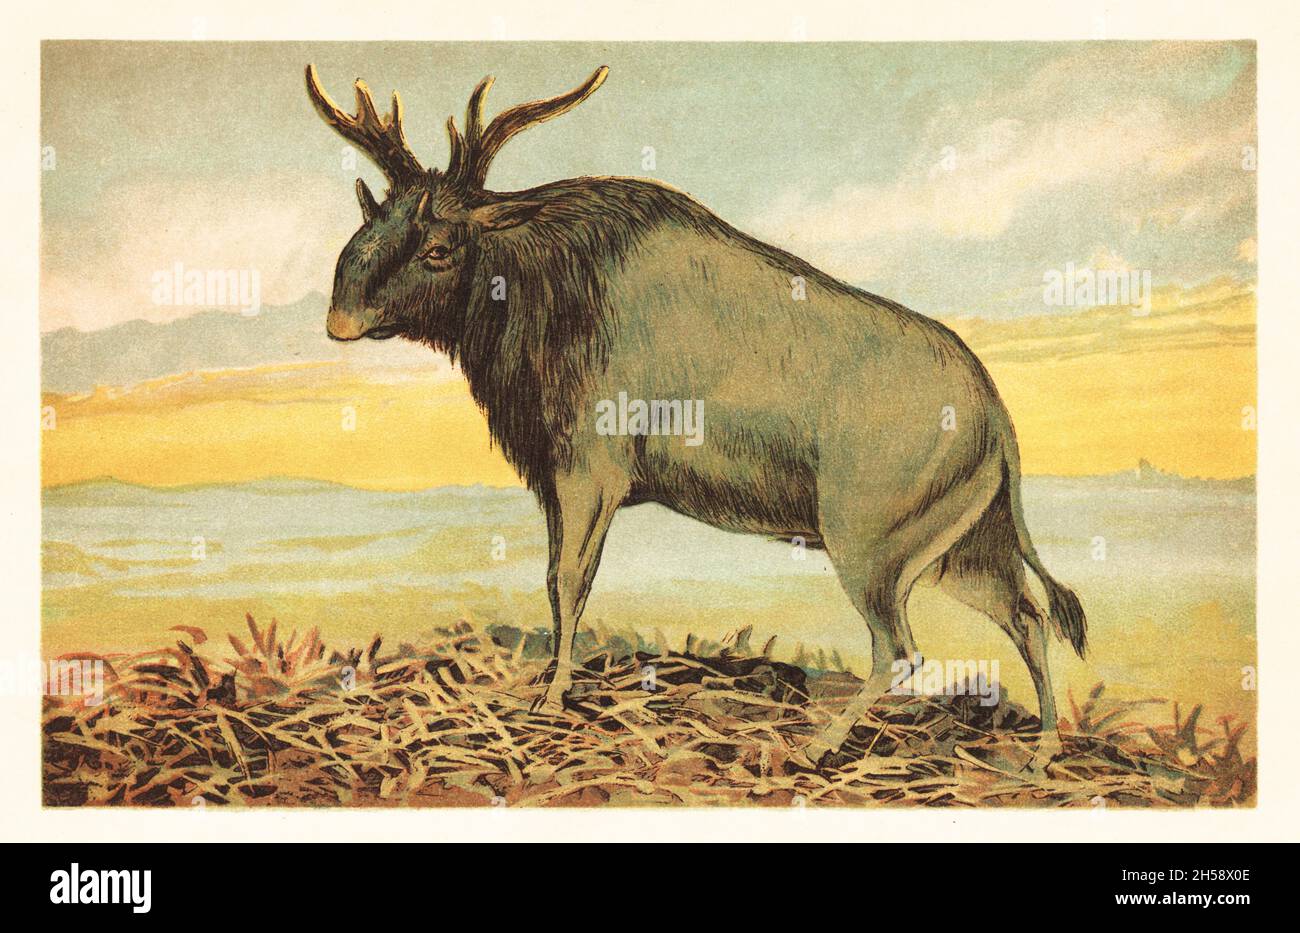 Shiva's beast or Sivatherium, Sivatherium giganteum, extinct species of giraffid of the Late Miocene to the late Early Pleistocene (Calabrian). Sivatherium giganteum Falconer and Cautley. Colour printed illustration by F. John from Wilhelm Bolsche’s Tiere der Urwelt (Animals of the Prehistoric World), Reichardt Cocoa company, Hamburg, 1908. Stock Photo